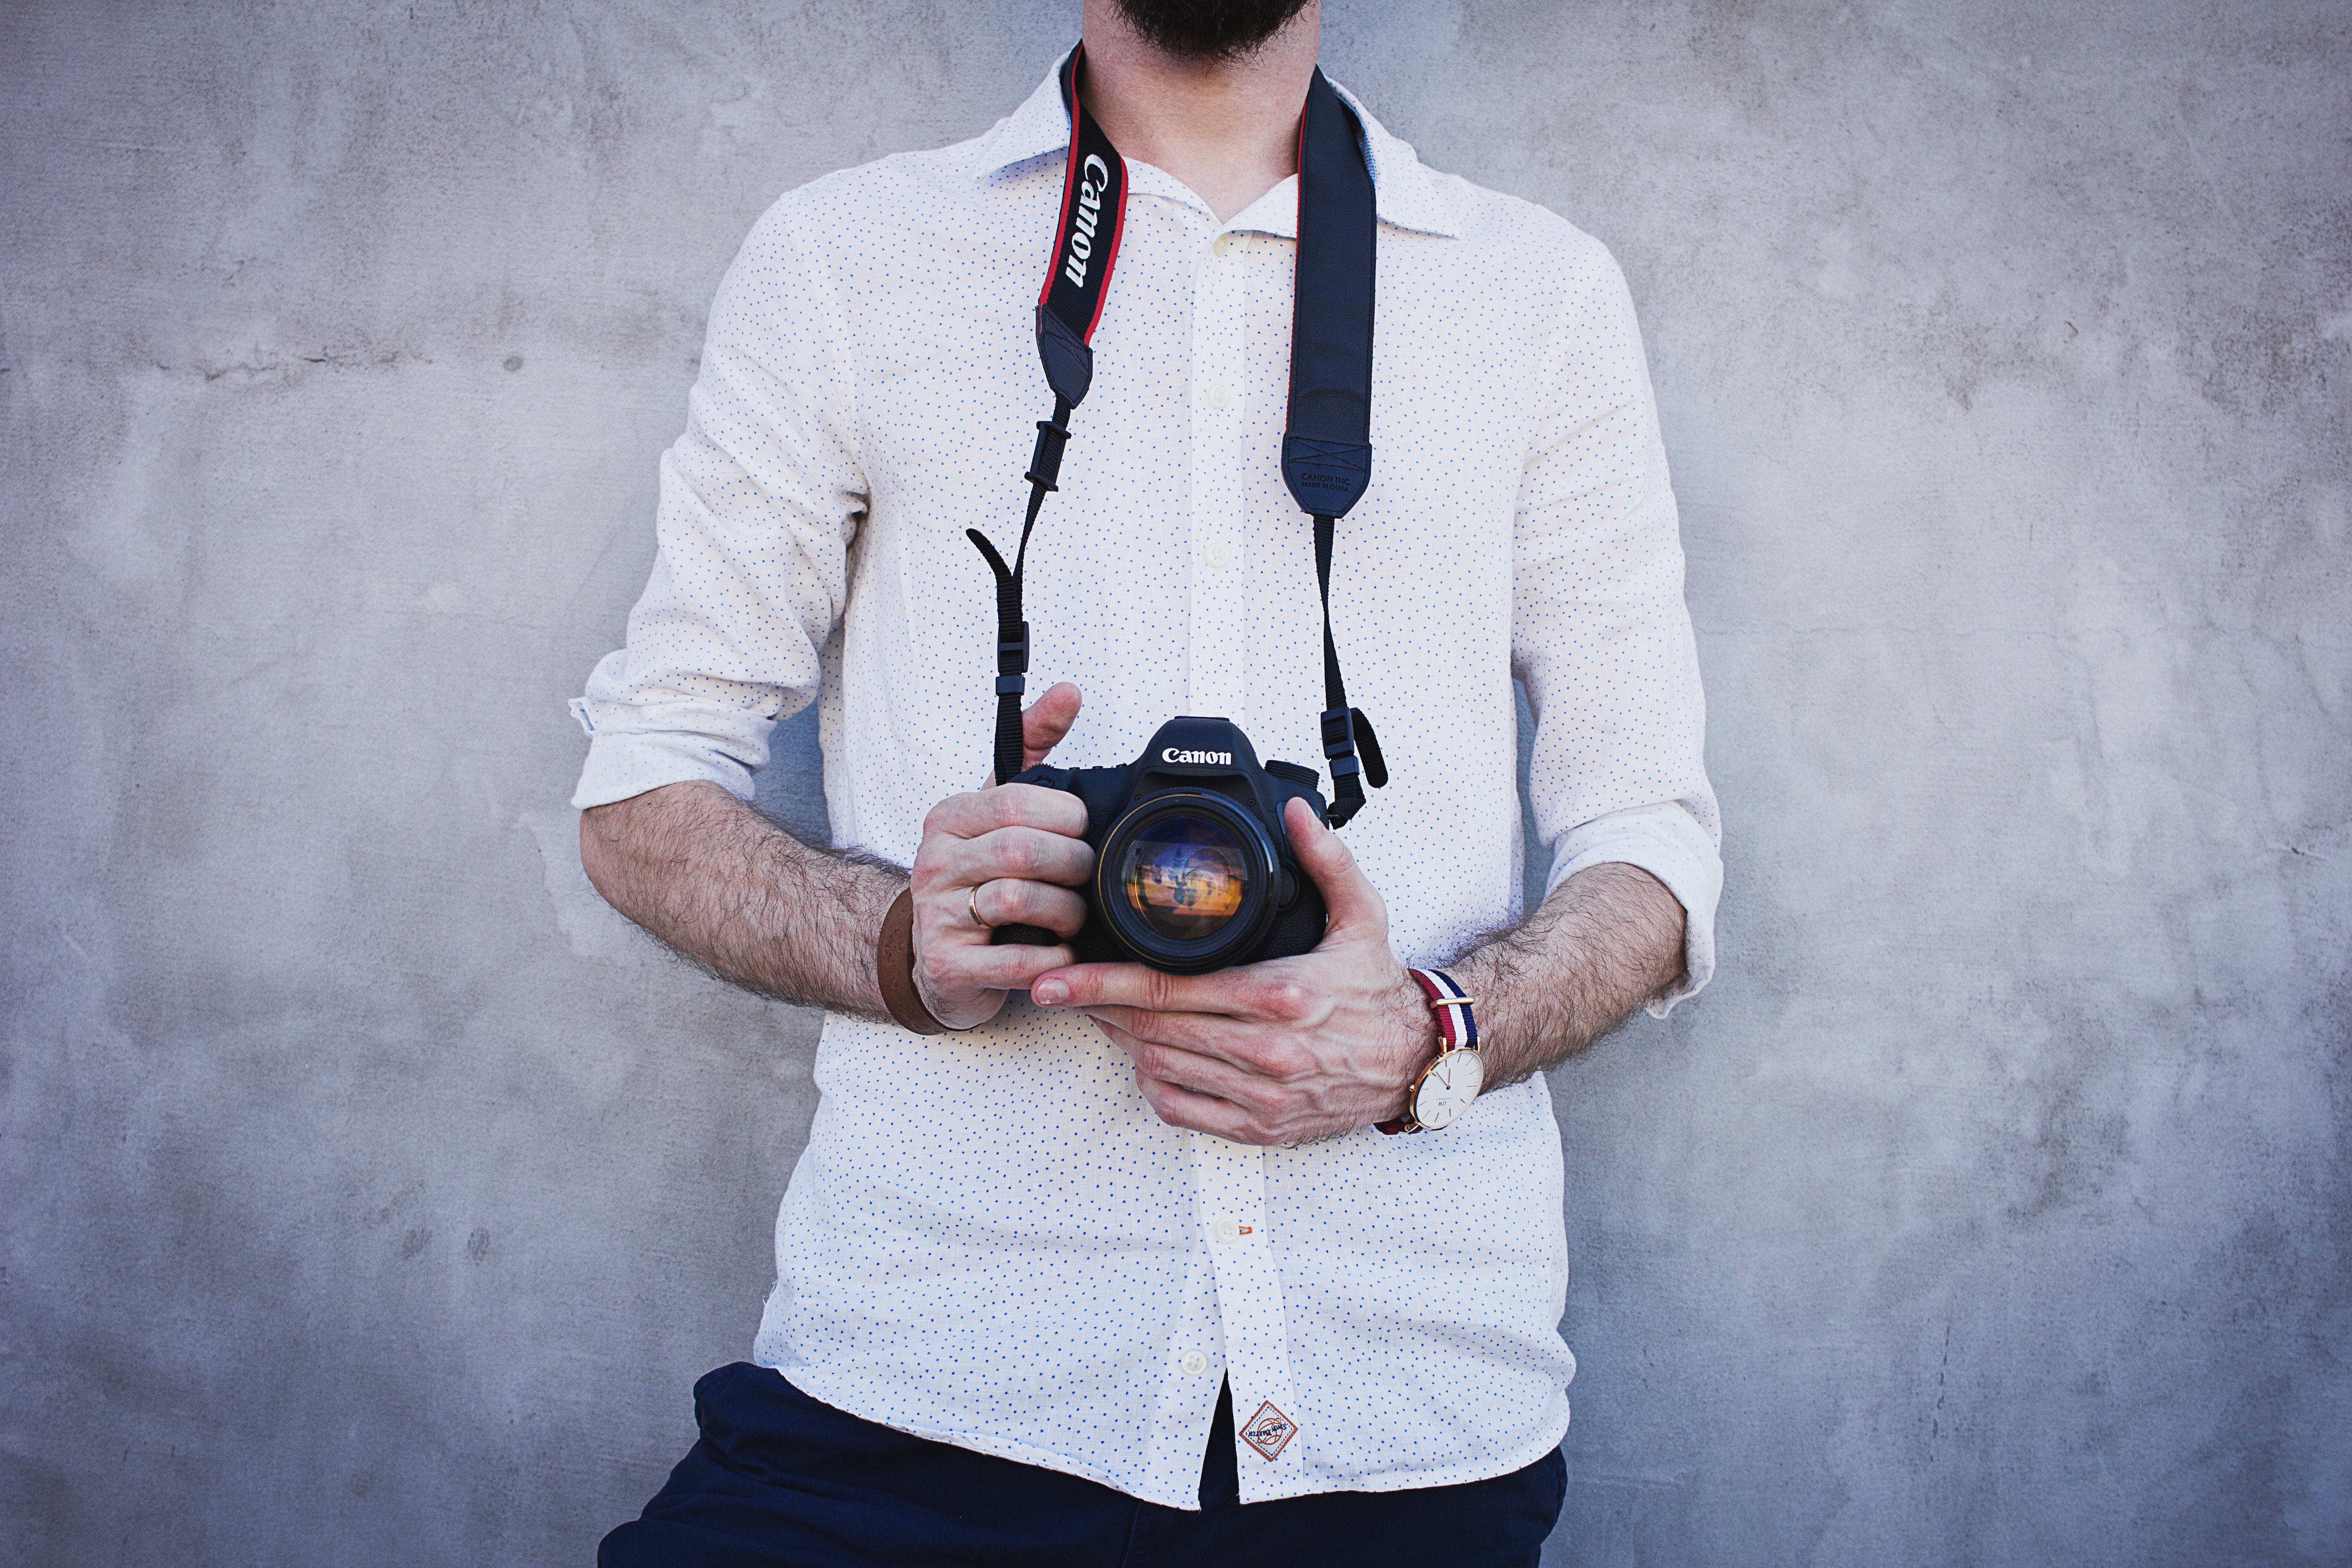 How To Make Your Photography Business Stand Out From the Crowd